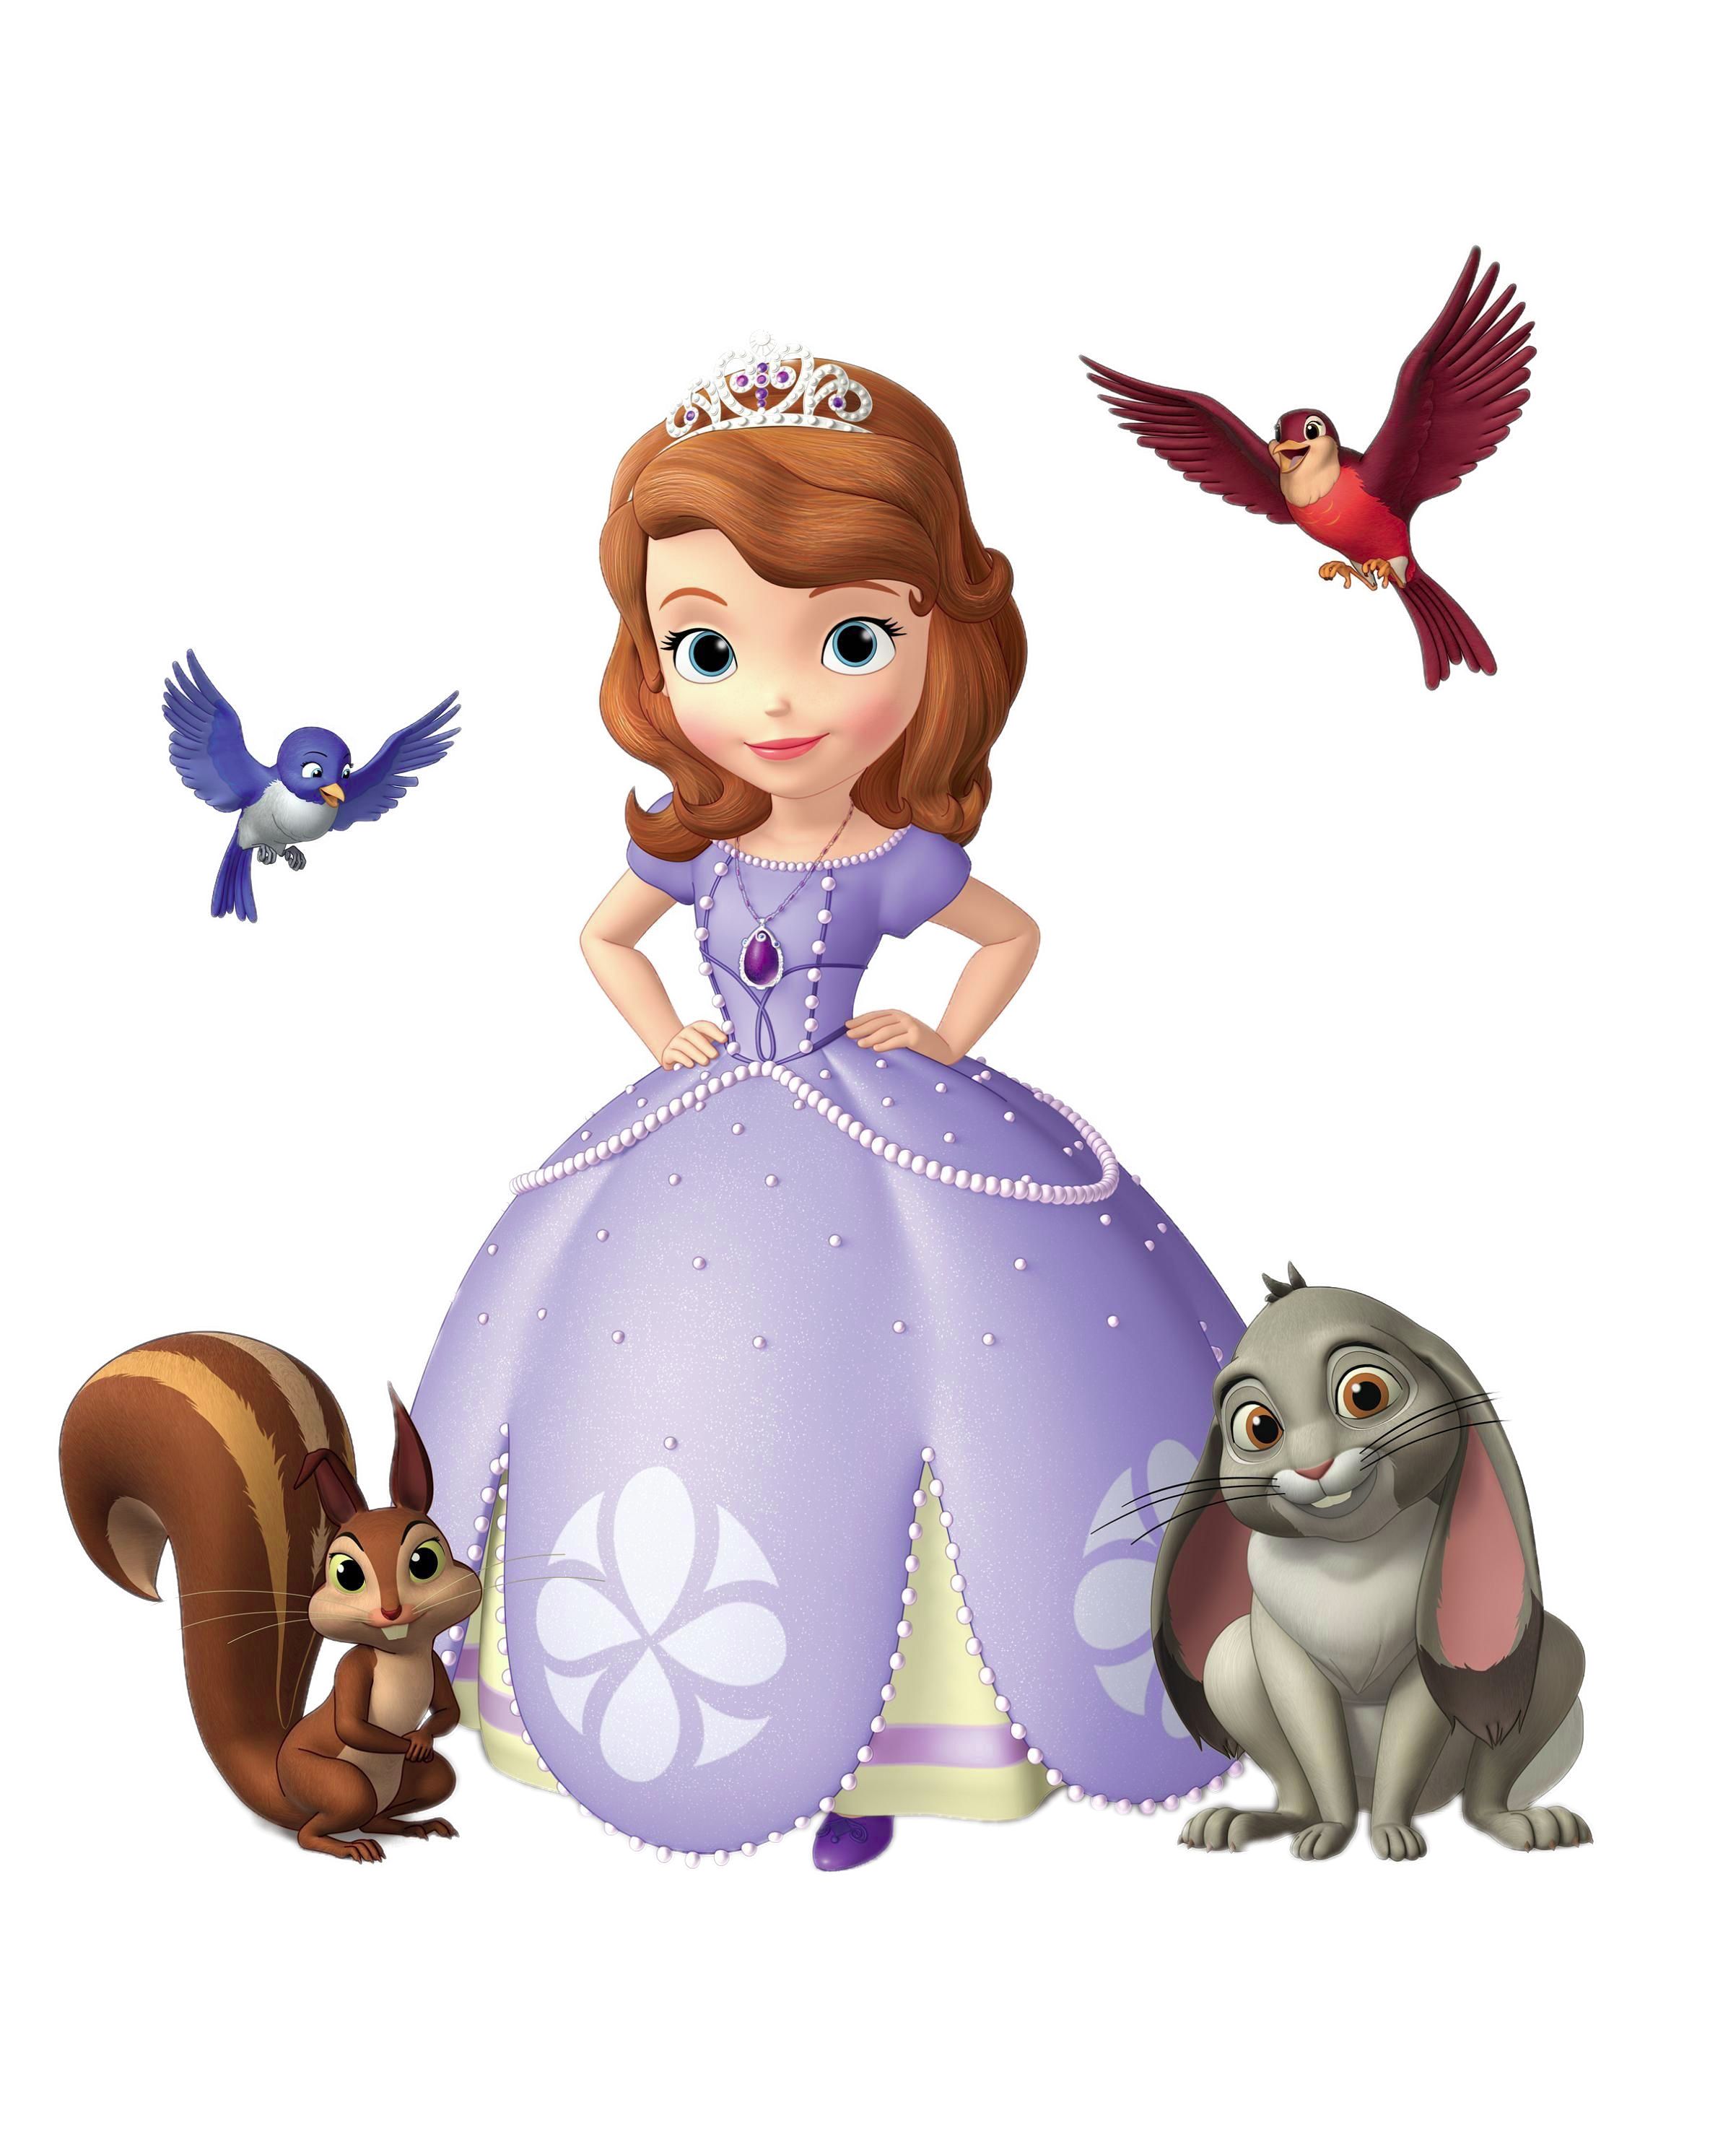 Sofia the First with animal friends PNG Image.